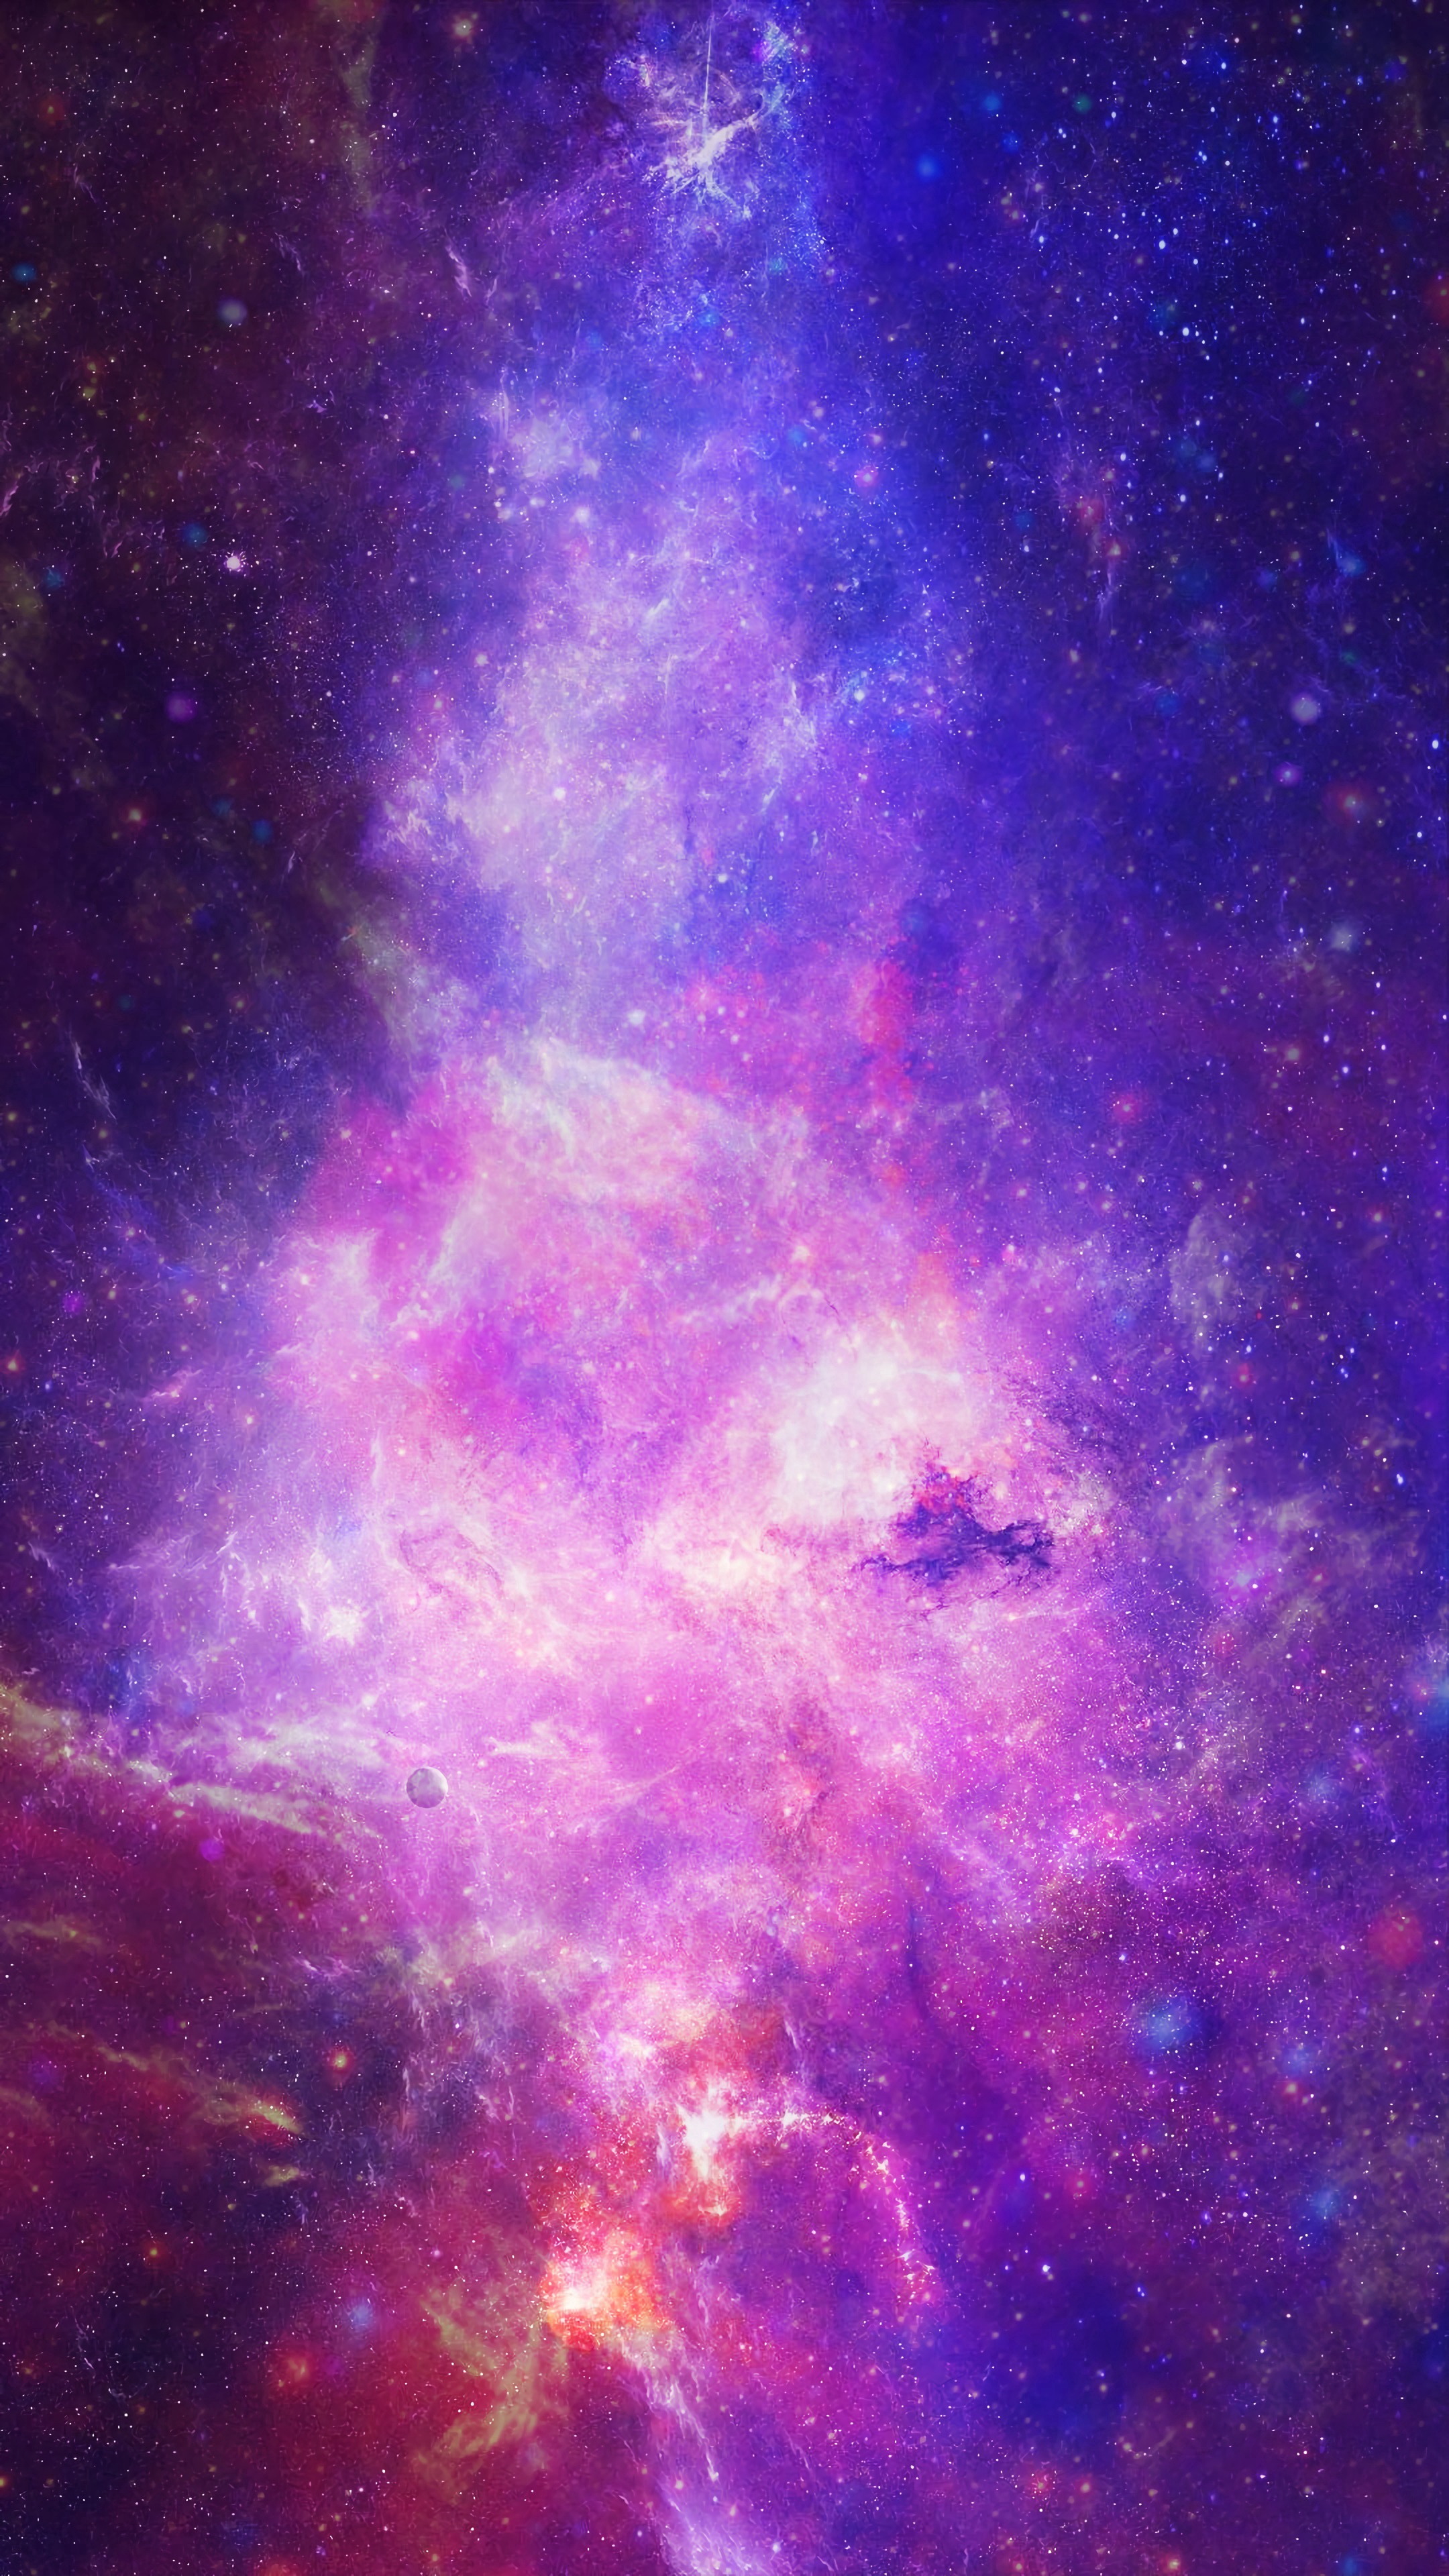 Space Nebula Galaxy Stars Bright Saturated - Galaxy Moto E4 Phone Cases , HD Wallpaper & Backgrounds